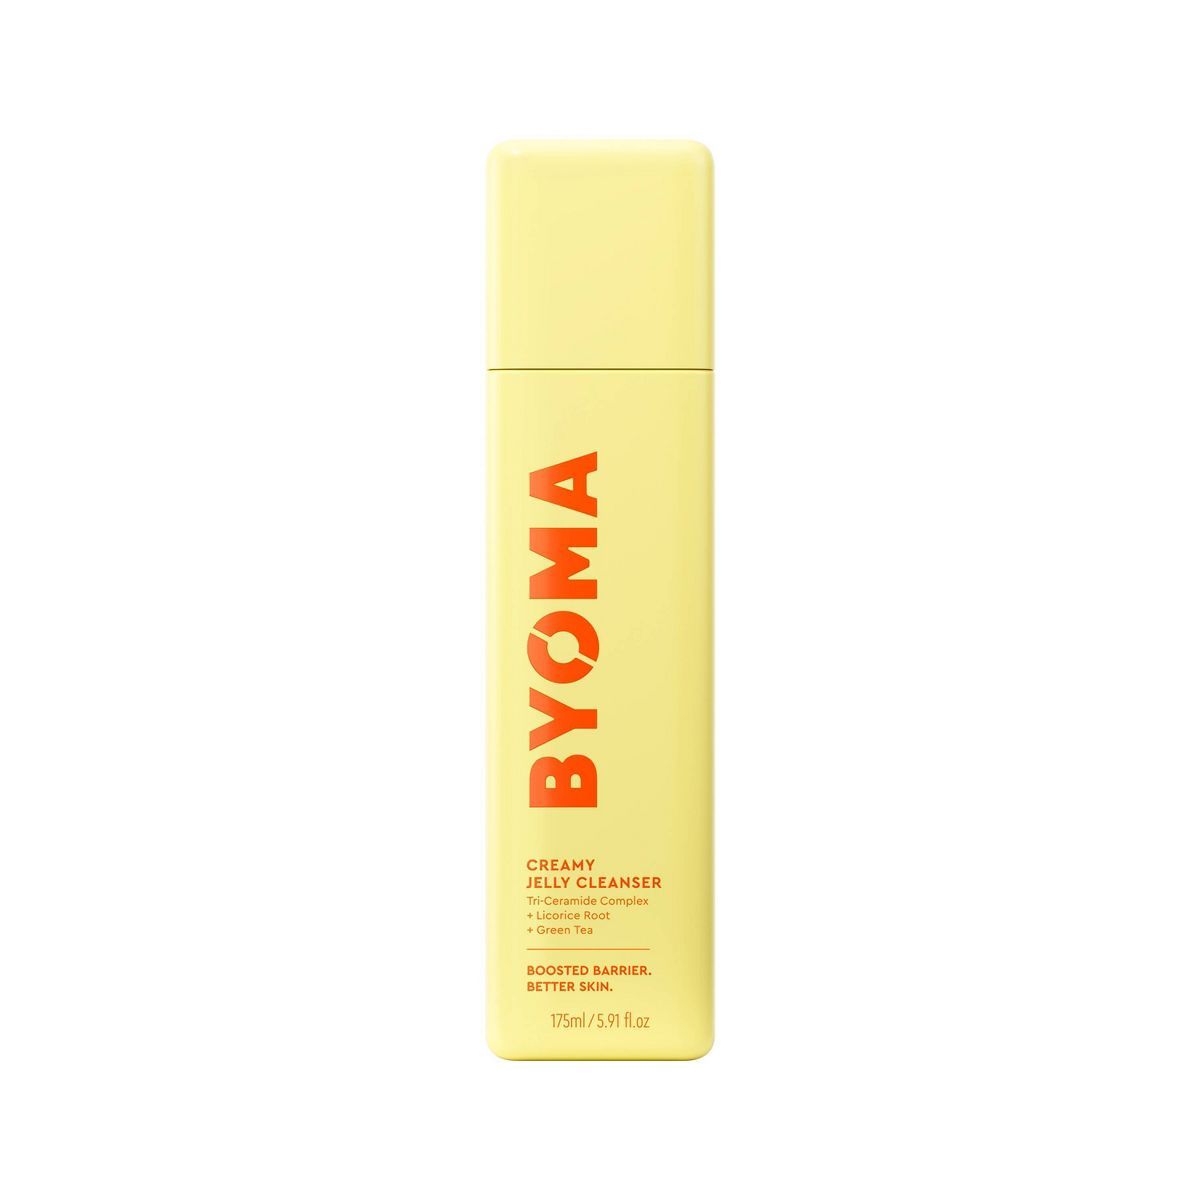 BYOMA Creamy Jelly Face Cleanser - Unscented | Target